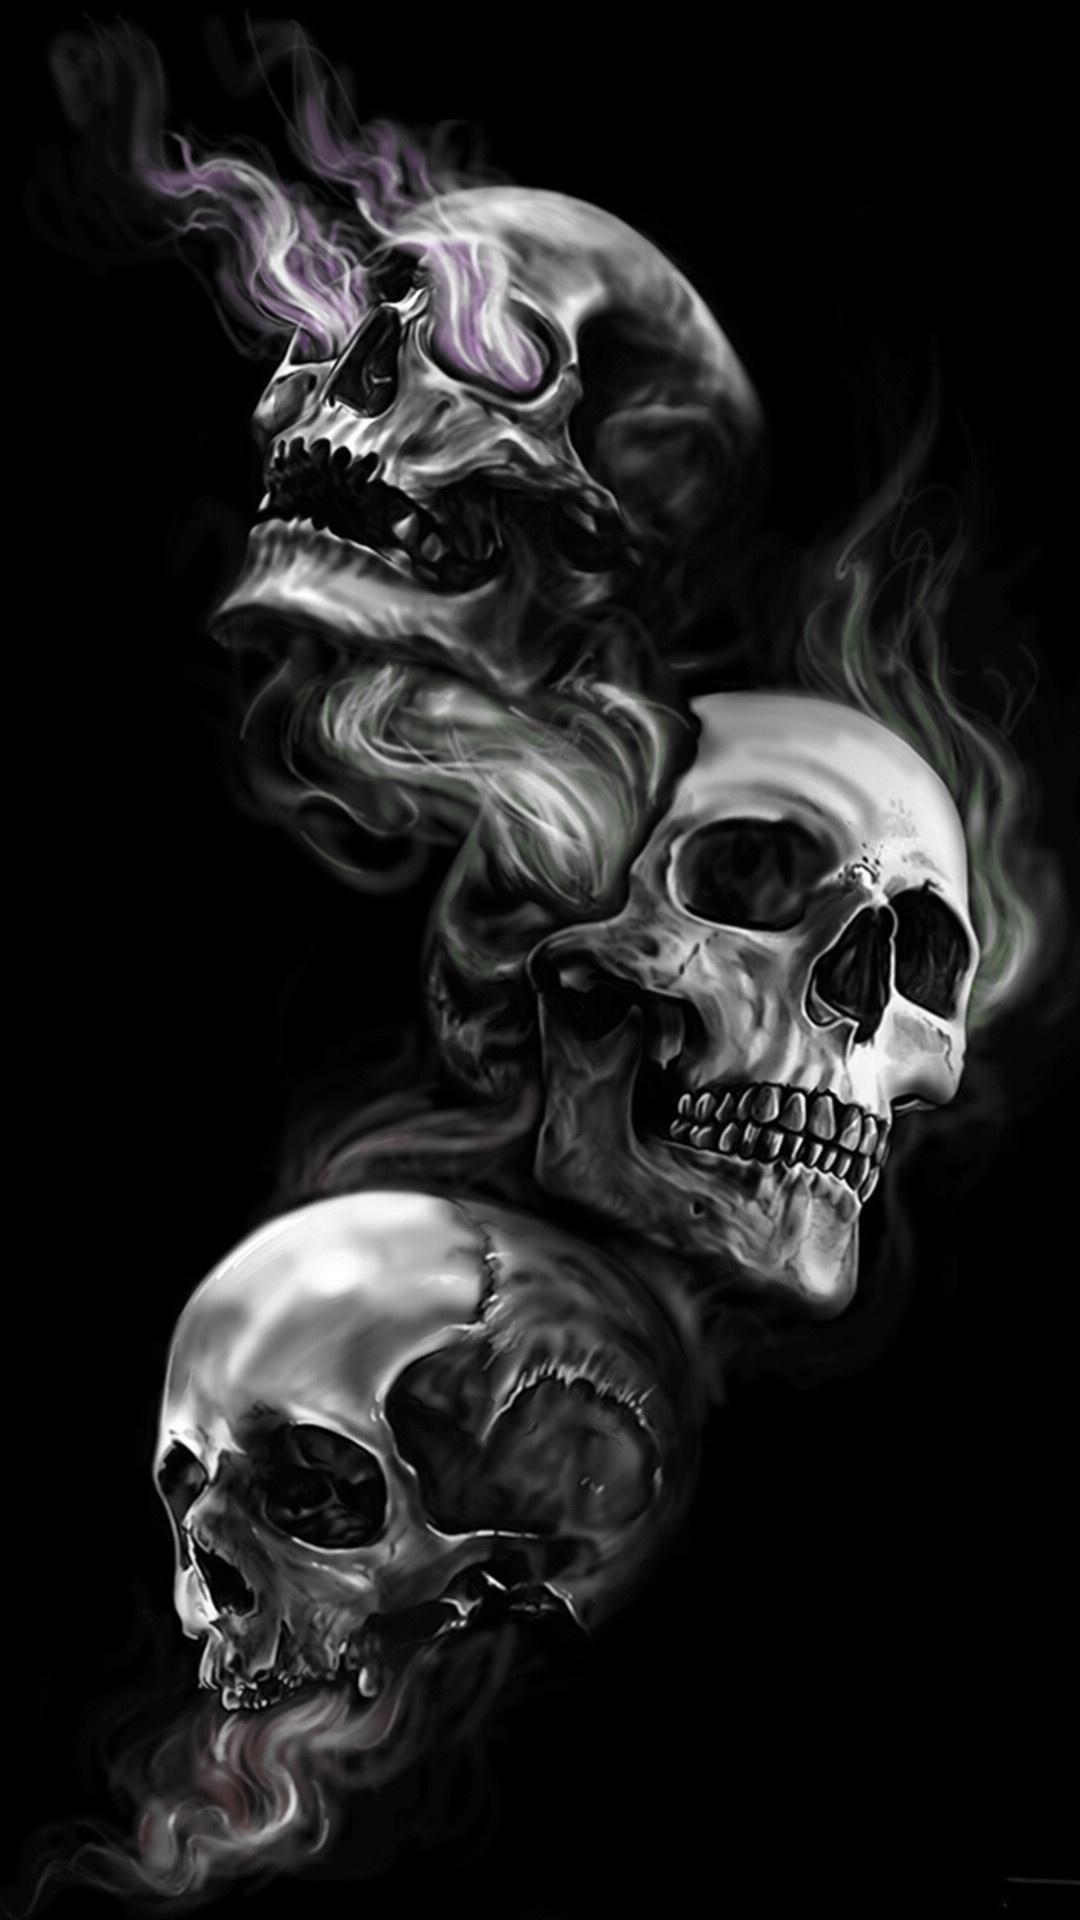 1080x1920 ... Badass Wallpapers For Android 04 0f 40 Three Skulls on Dark Black  Background